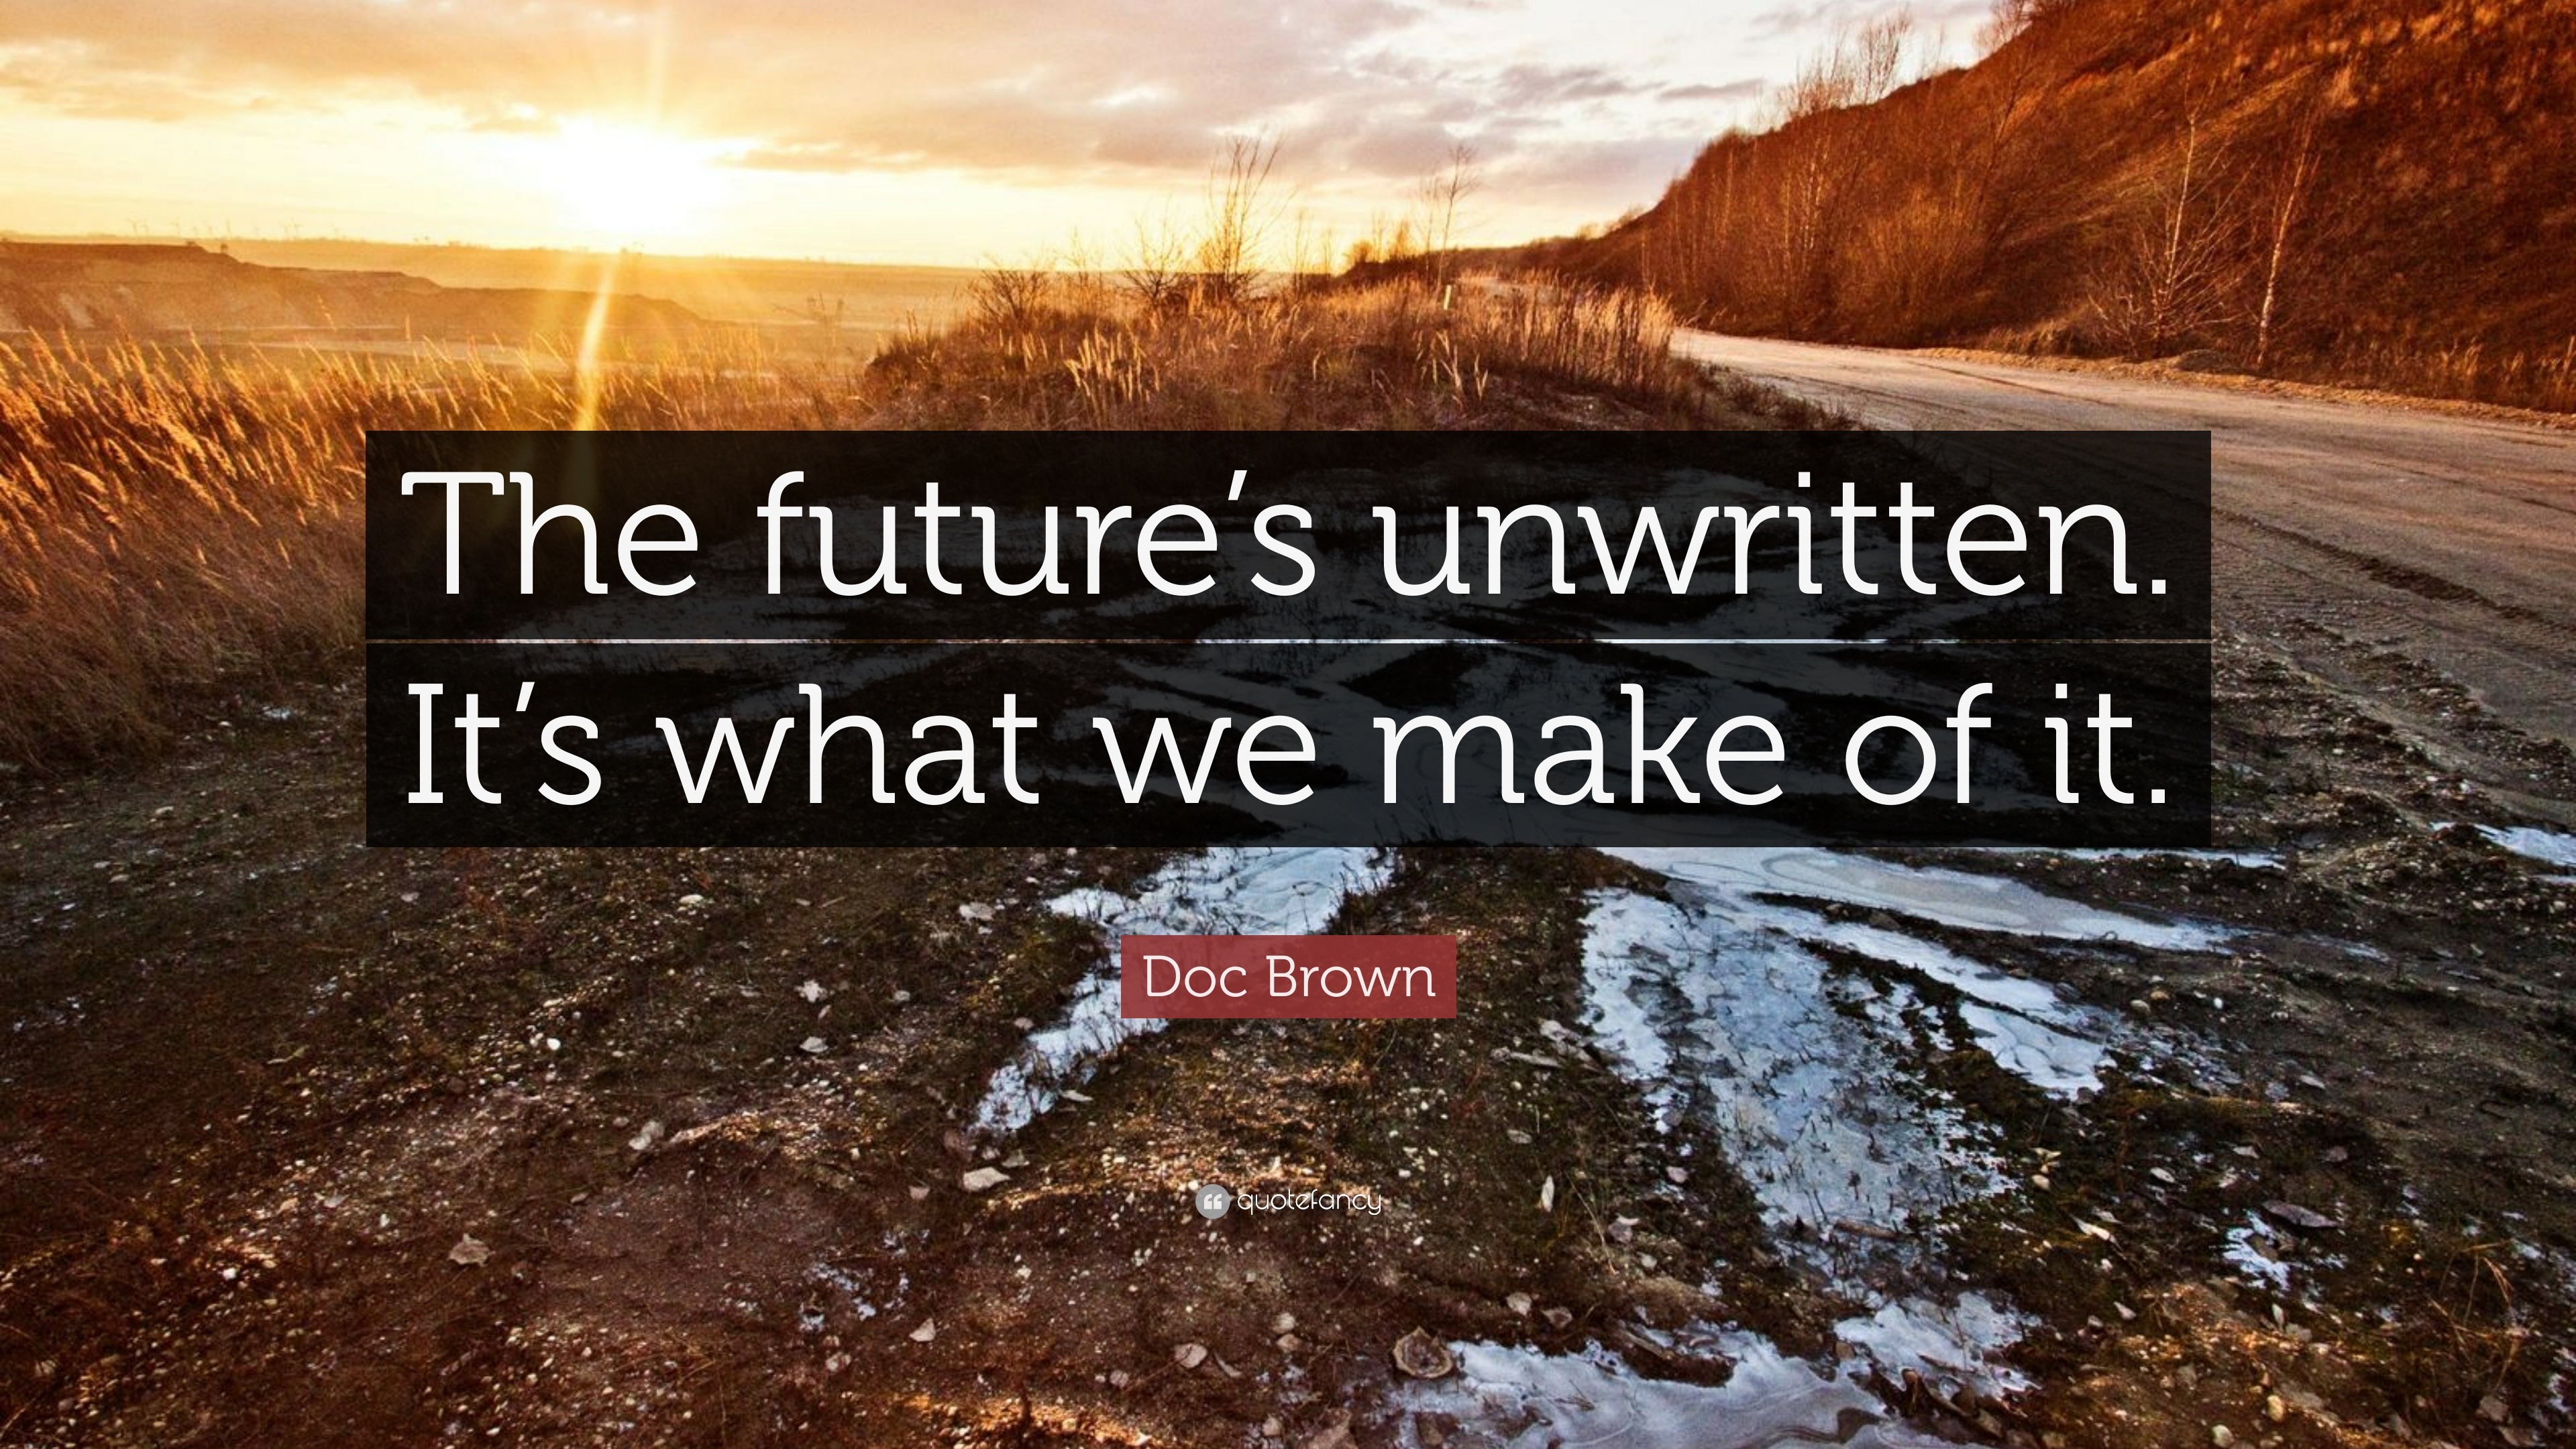 Doc Brown Quote “The future’s unwritten. It’s what we make of it.”